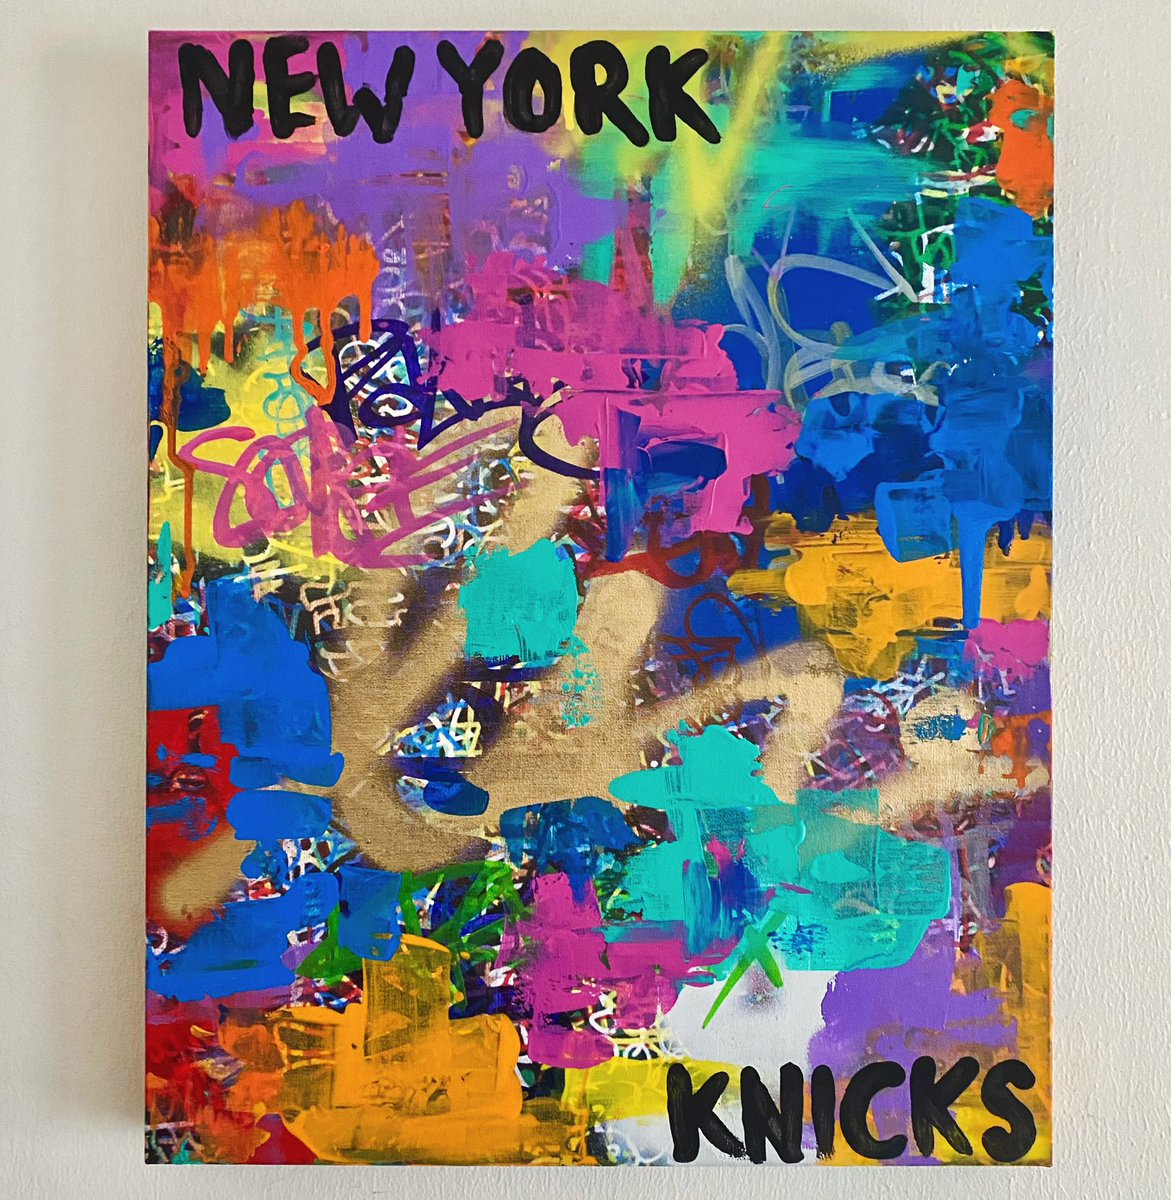 #Knicks take game 2 so heres progress on my #NewYorkKnicks painting thedngr.com 4 art photography tshirts buttons magnets mirrors + ebay collectibles @ ebay.com/usr/thedngr #NBAPlayoffs  #NYKnicks #KnicksNation #KnicksVsPacers #abstractart #popart #nyc #newyorkcity